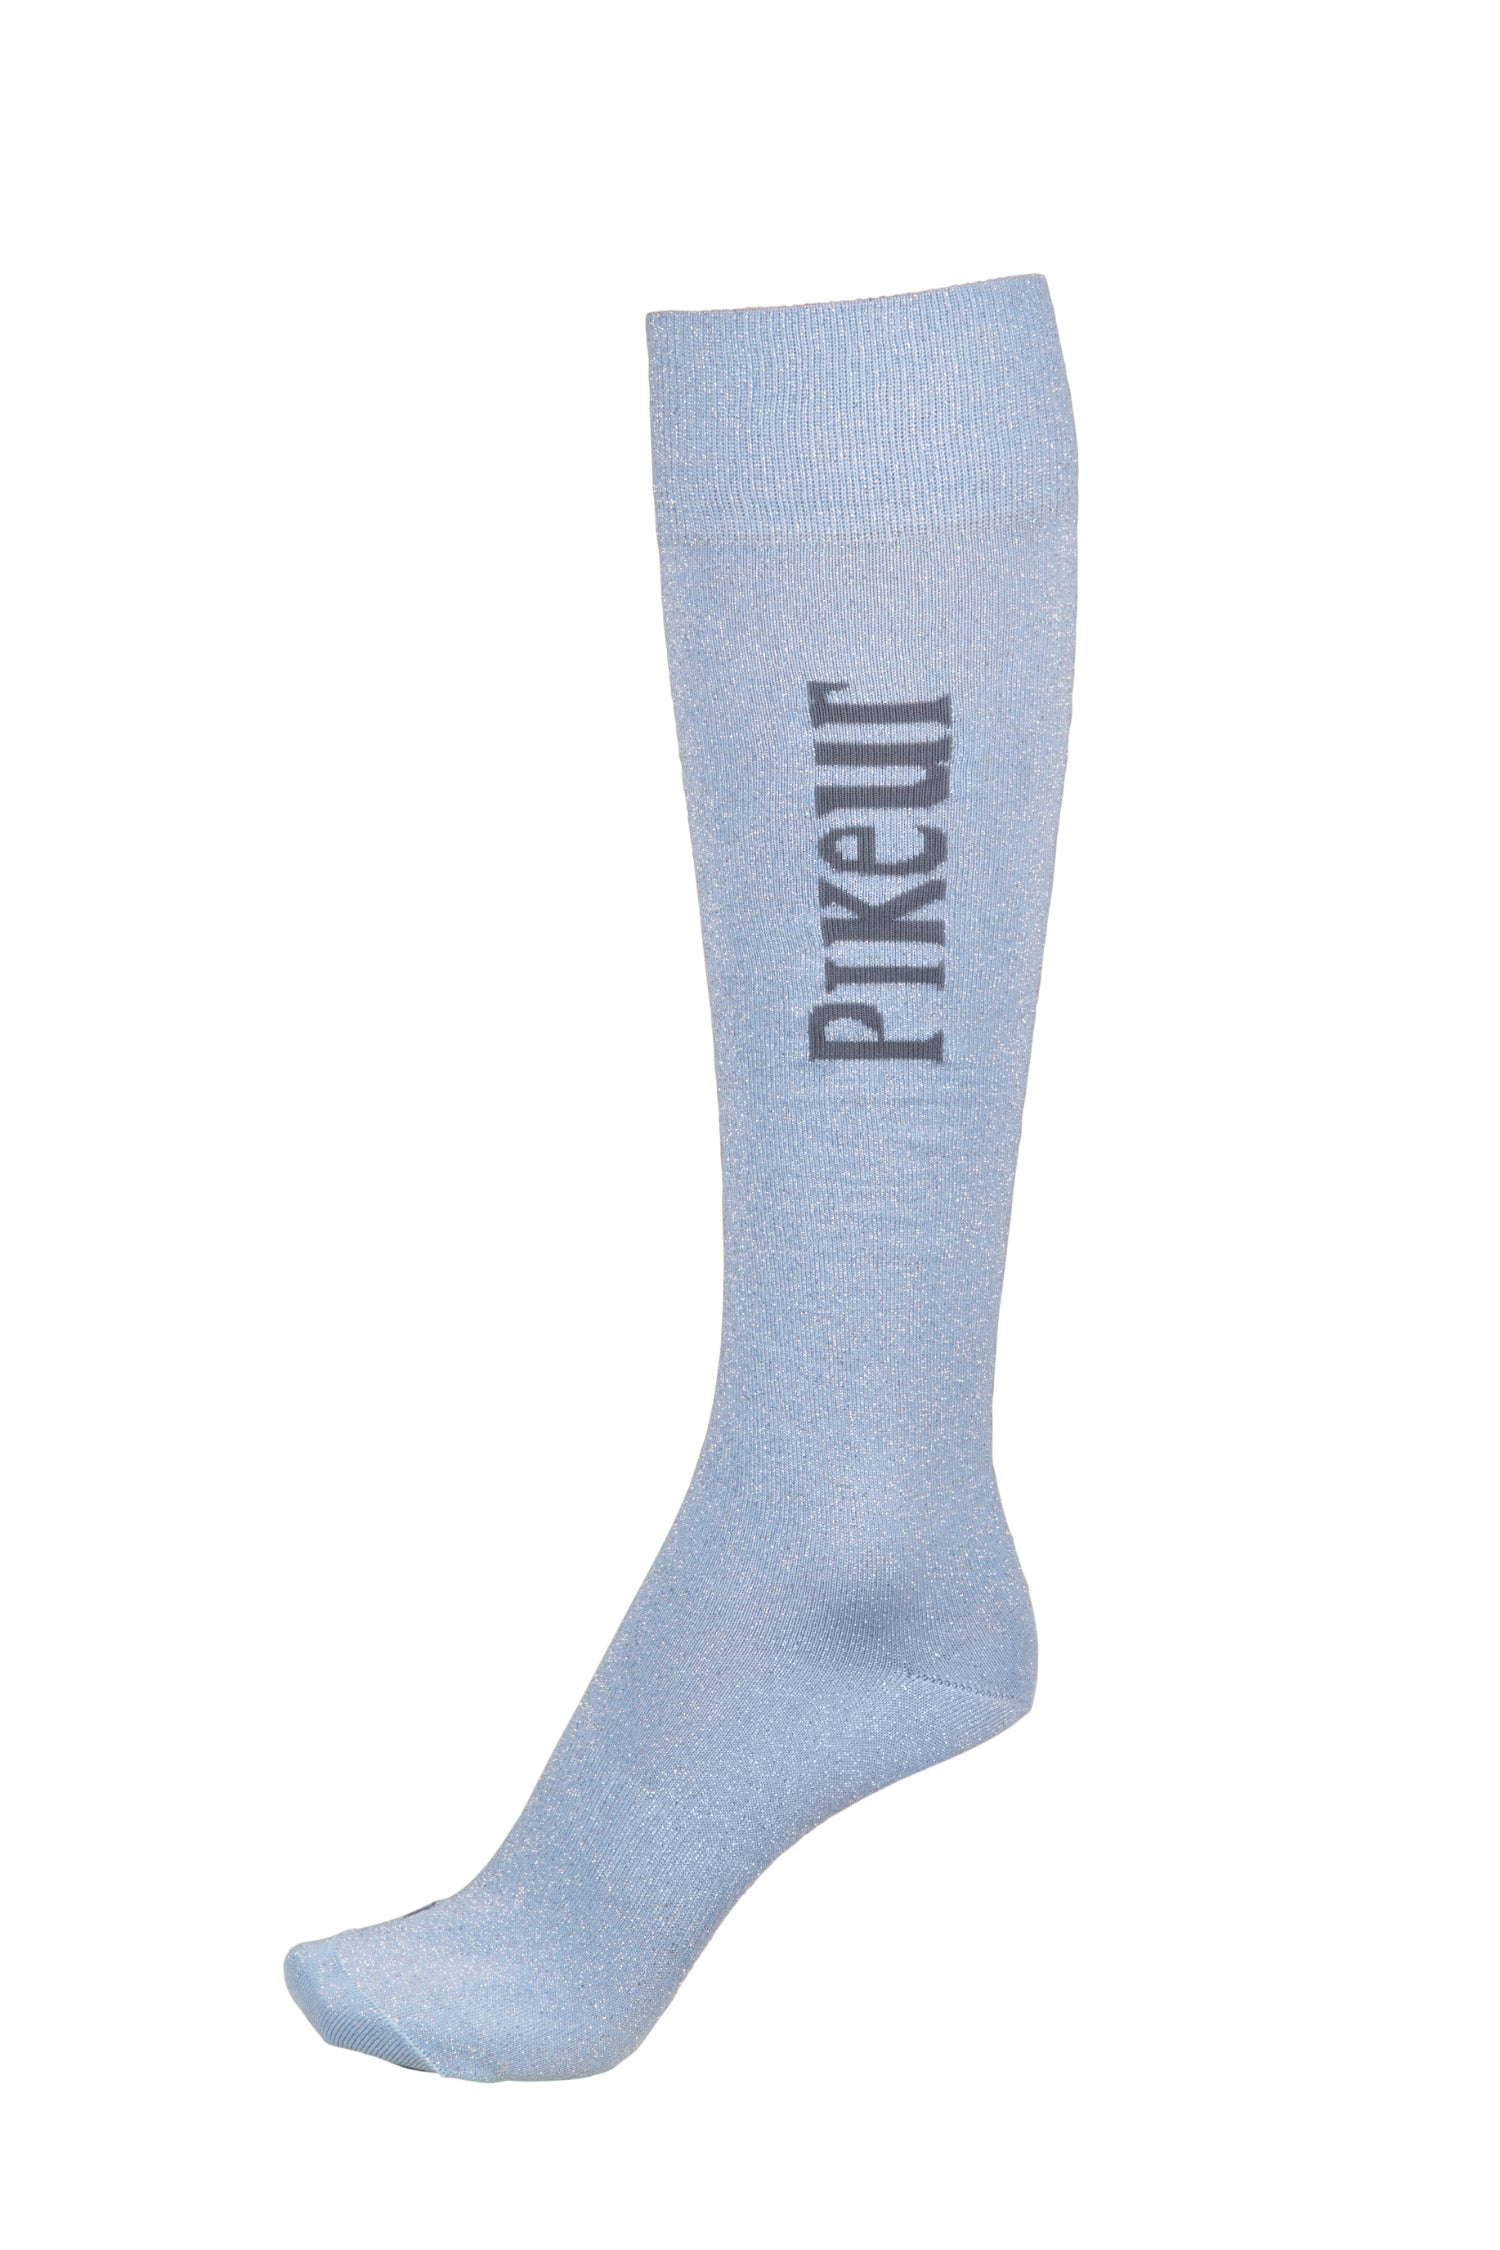 Pikeur Sports Lurex Knee Socks 5734 *Pre-order for March dispatch*